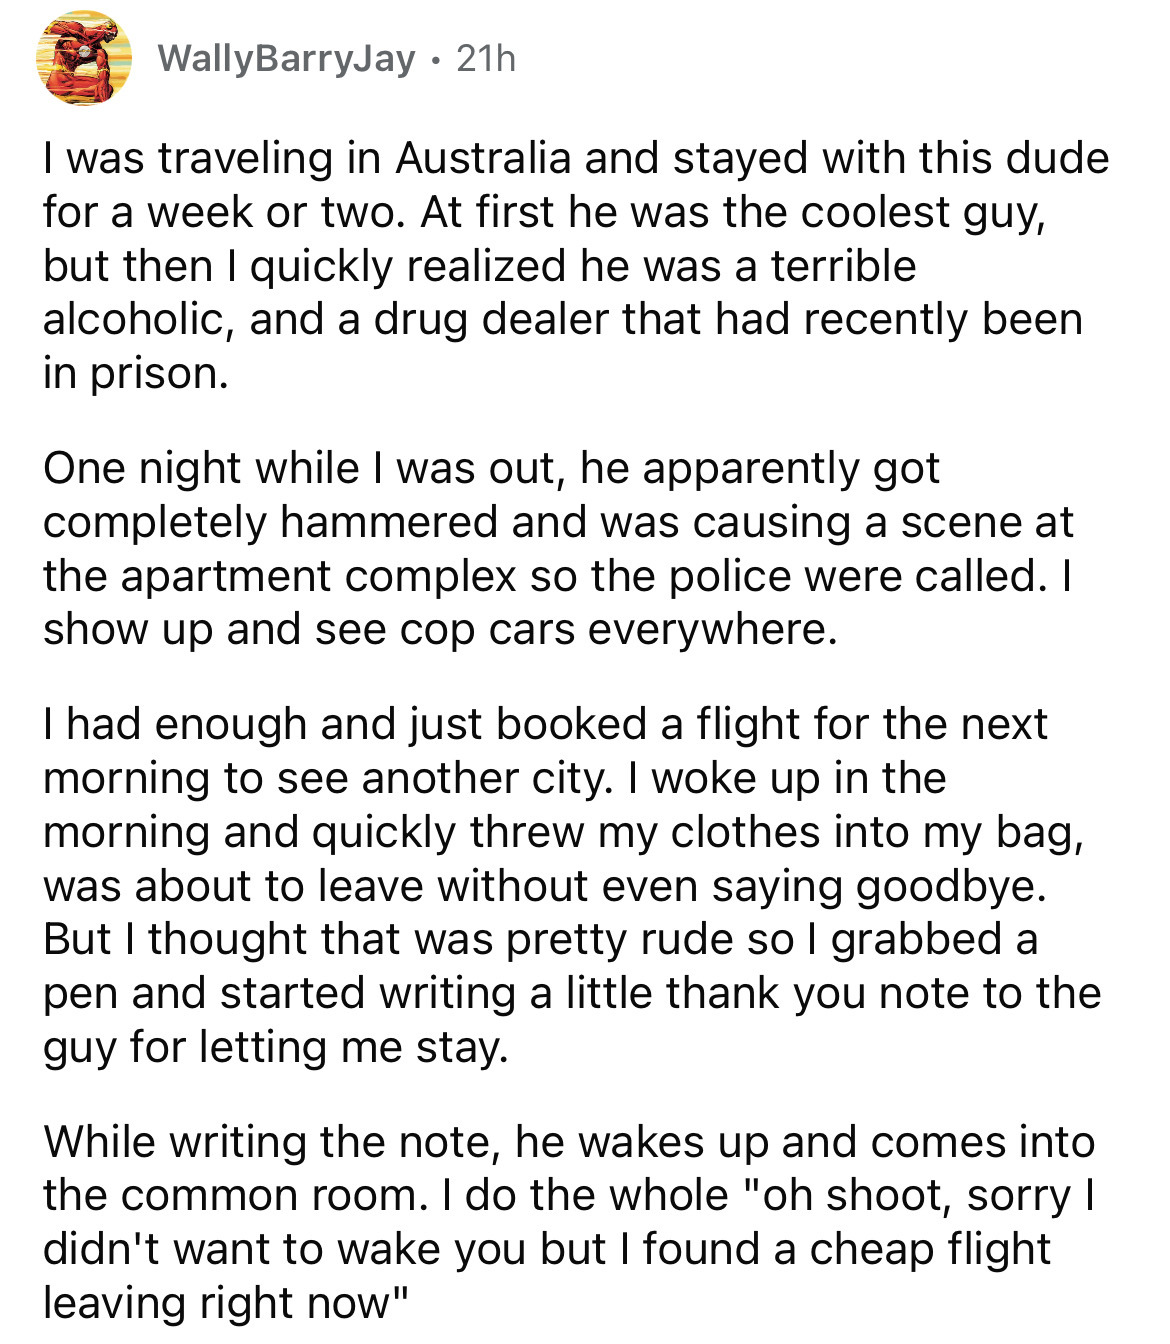 document - WallyBarryJay 21h I was traveling in Australia and stayed with this dude for a week or two. At first he was the coolest guy, but then I quickly realized he was a terrible alcoholic, and a drug dealer that had recently been in prison. One night 